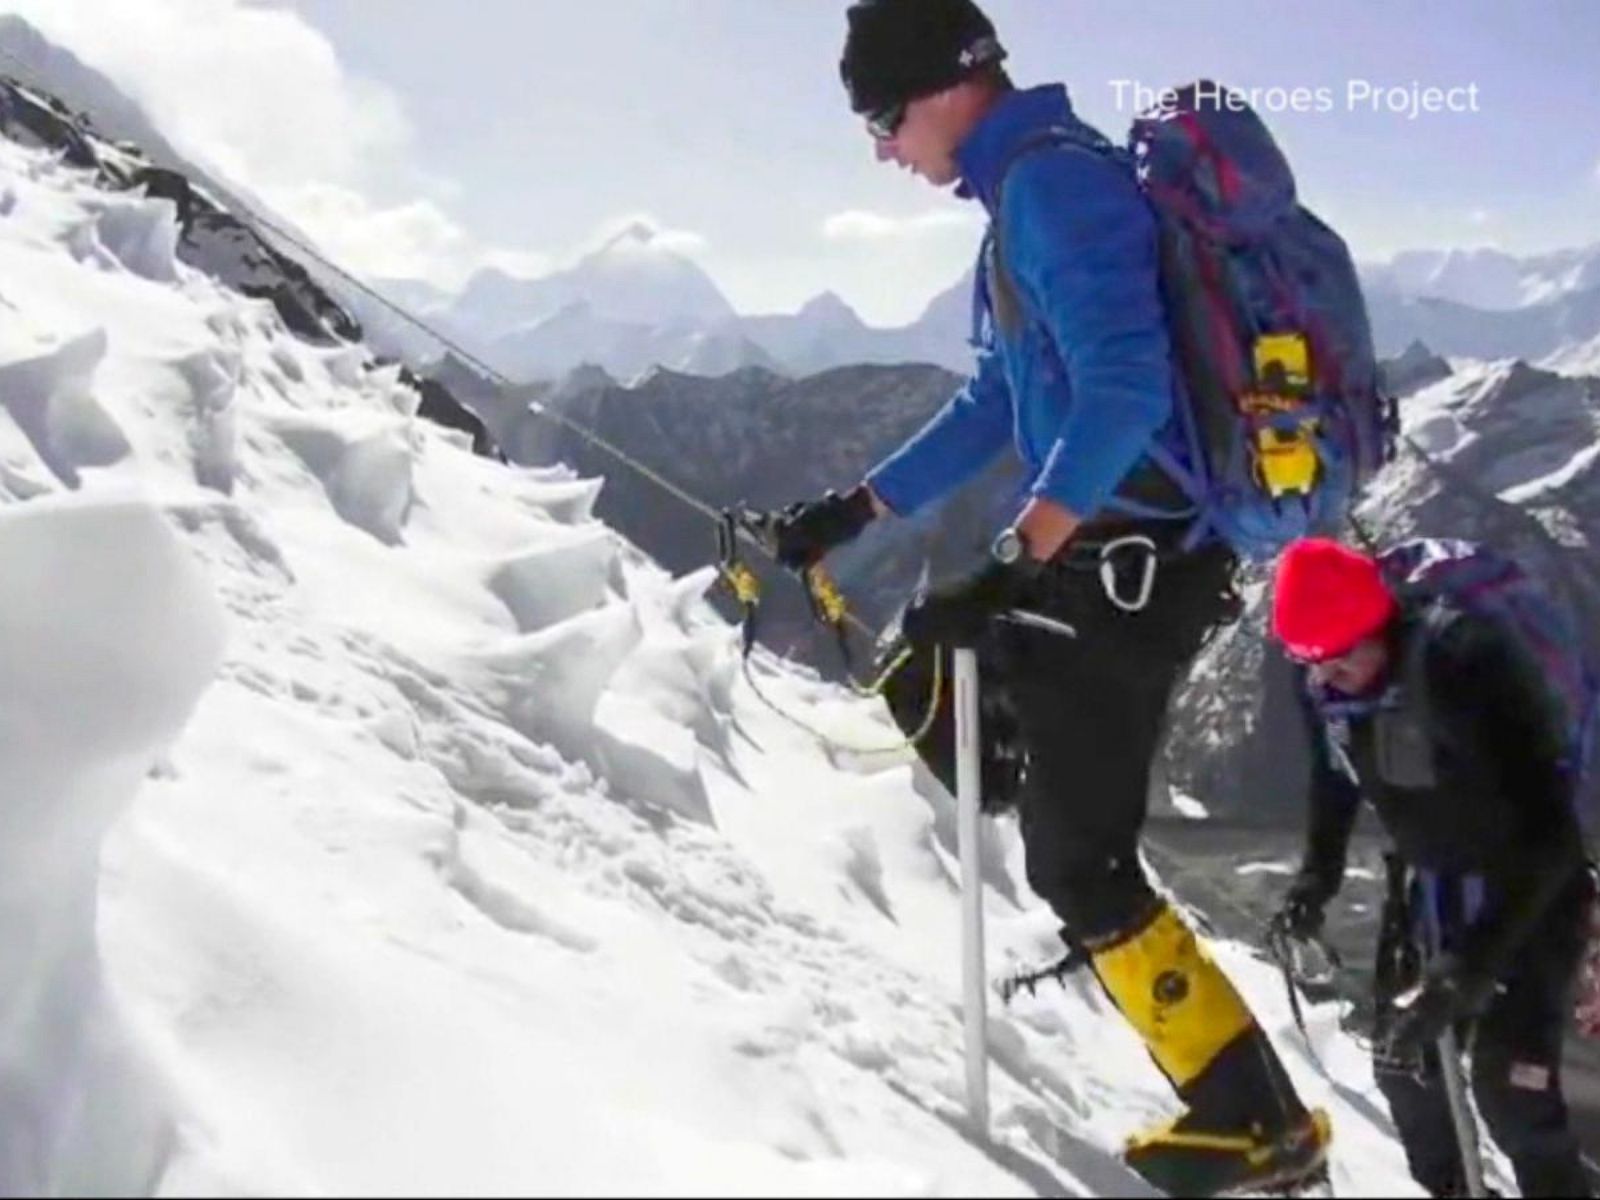 Celebrating Wounded Warriors on Top of the World